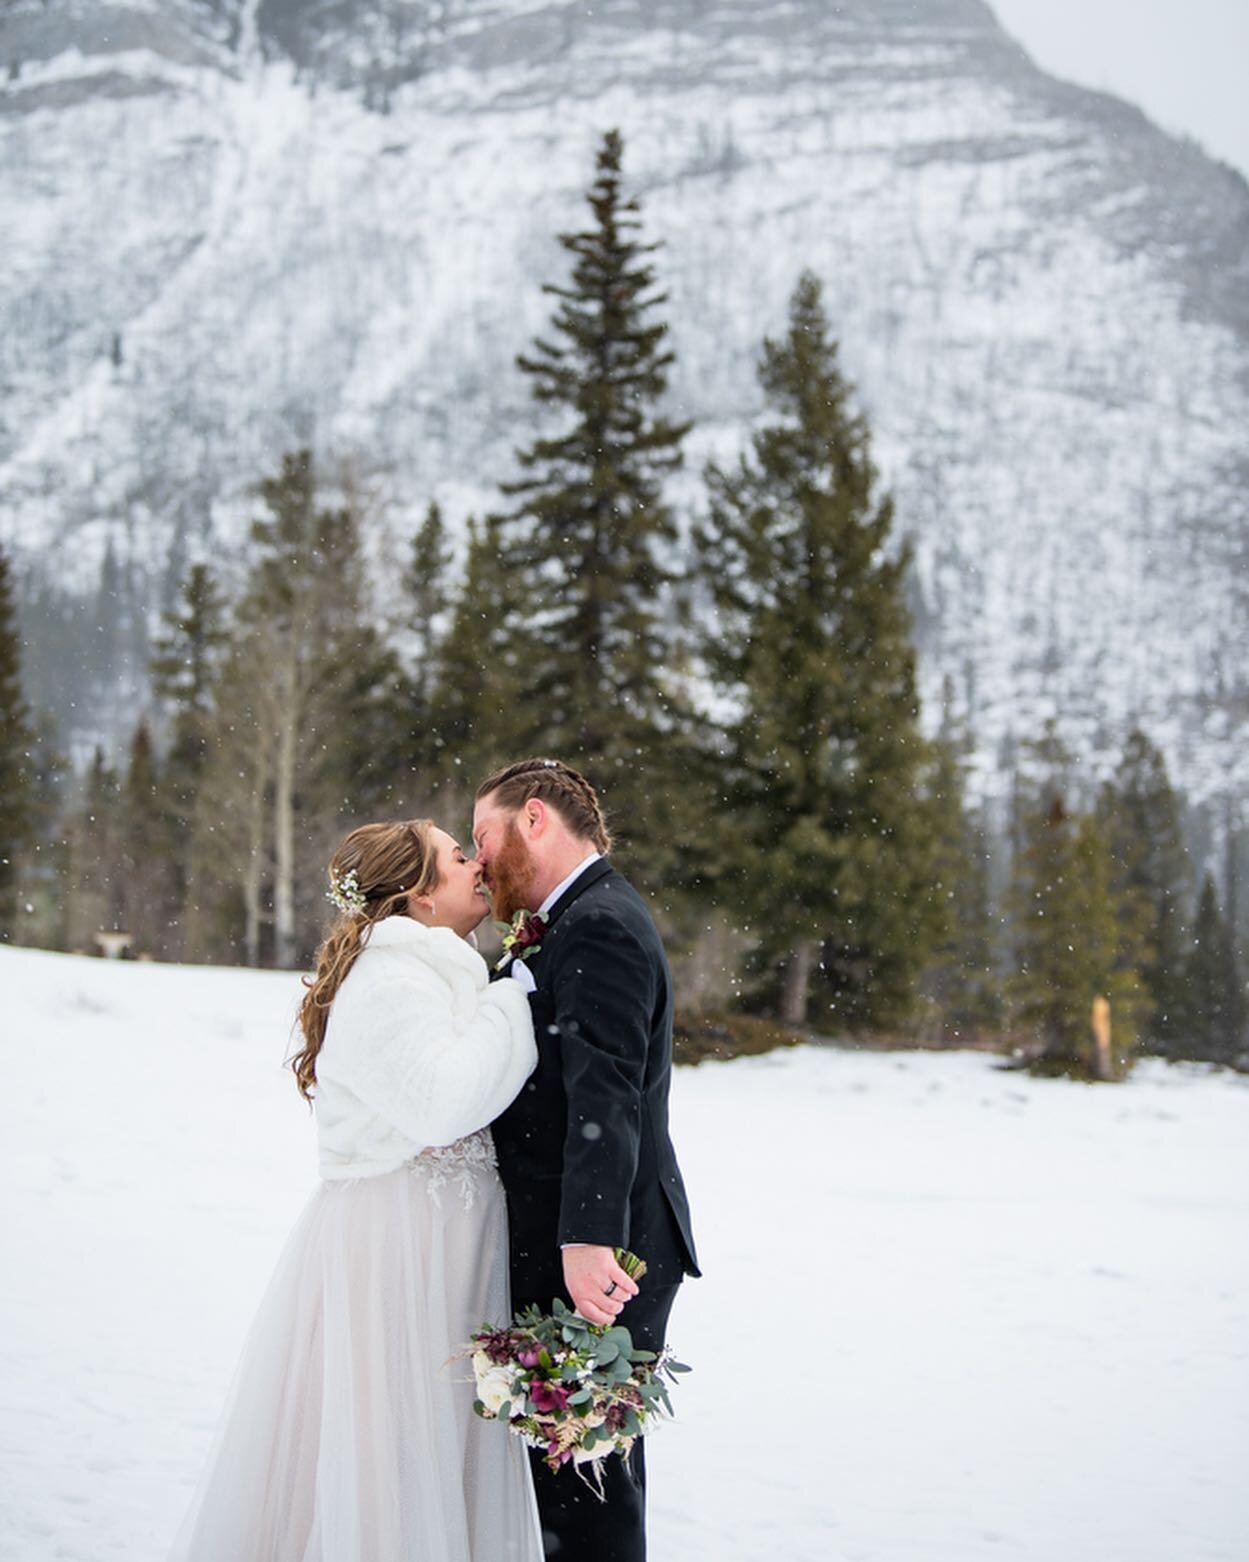 It&rsquo;s appropriately snowing as I post this beautiful snowy day in Banff at Lake Minnewanka. Cheryl &amp; Tim&rsquo;s sweet elopement with their kids was so heartfelt and personal. 💕

Planner: @naturallychicweddings 
Commisioner: @patricksmiley 